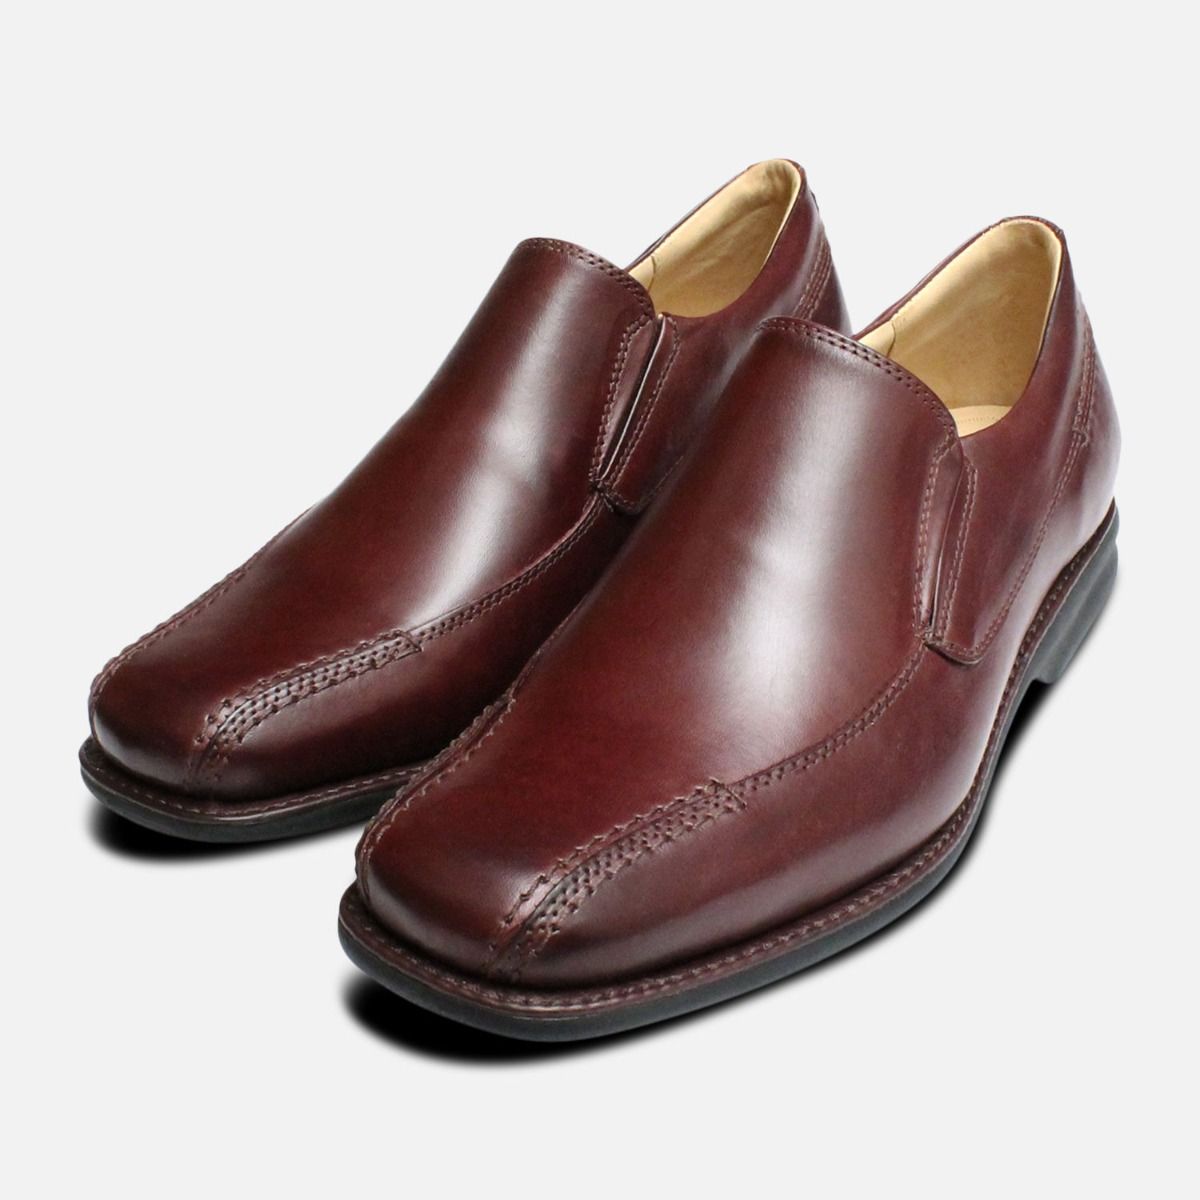 Burgundy Belem Loafers by Anatomic & Co Shoes